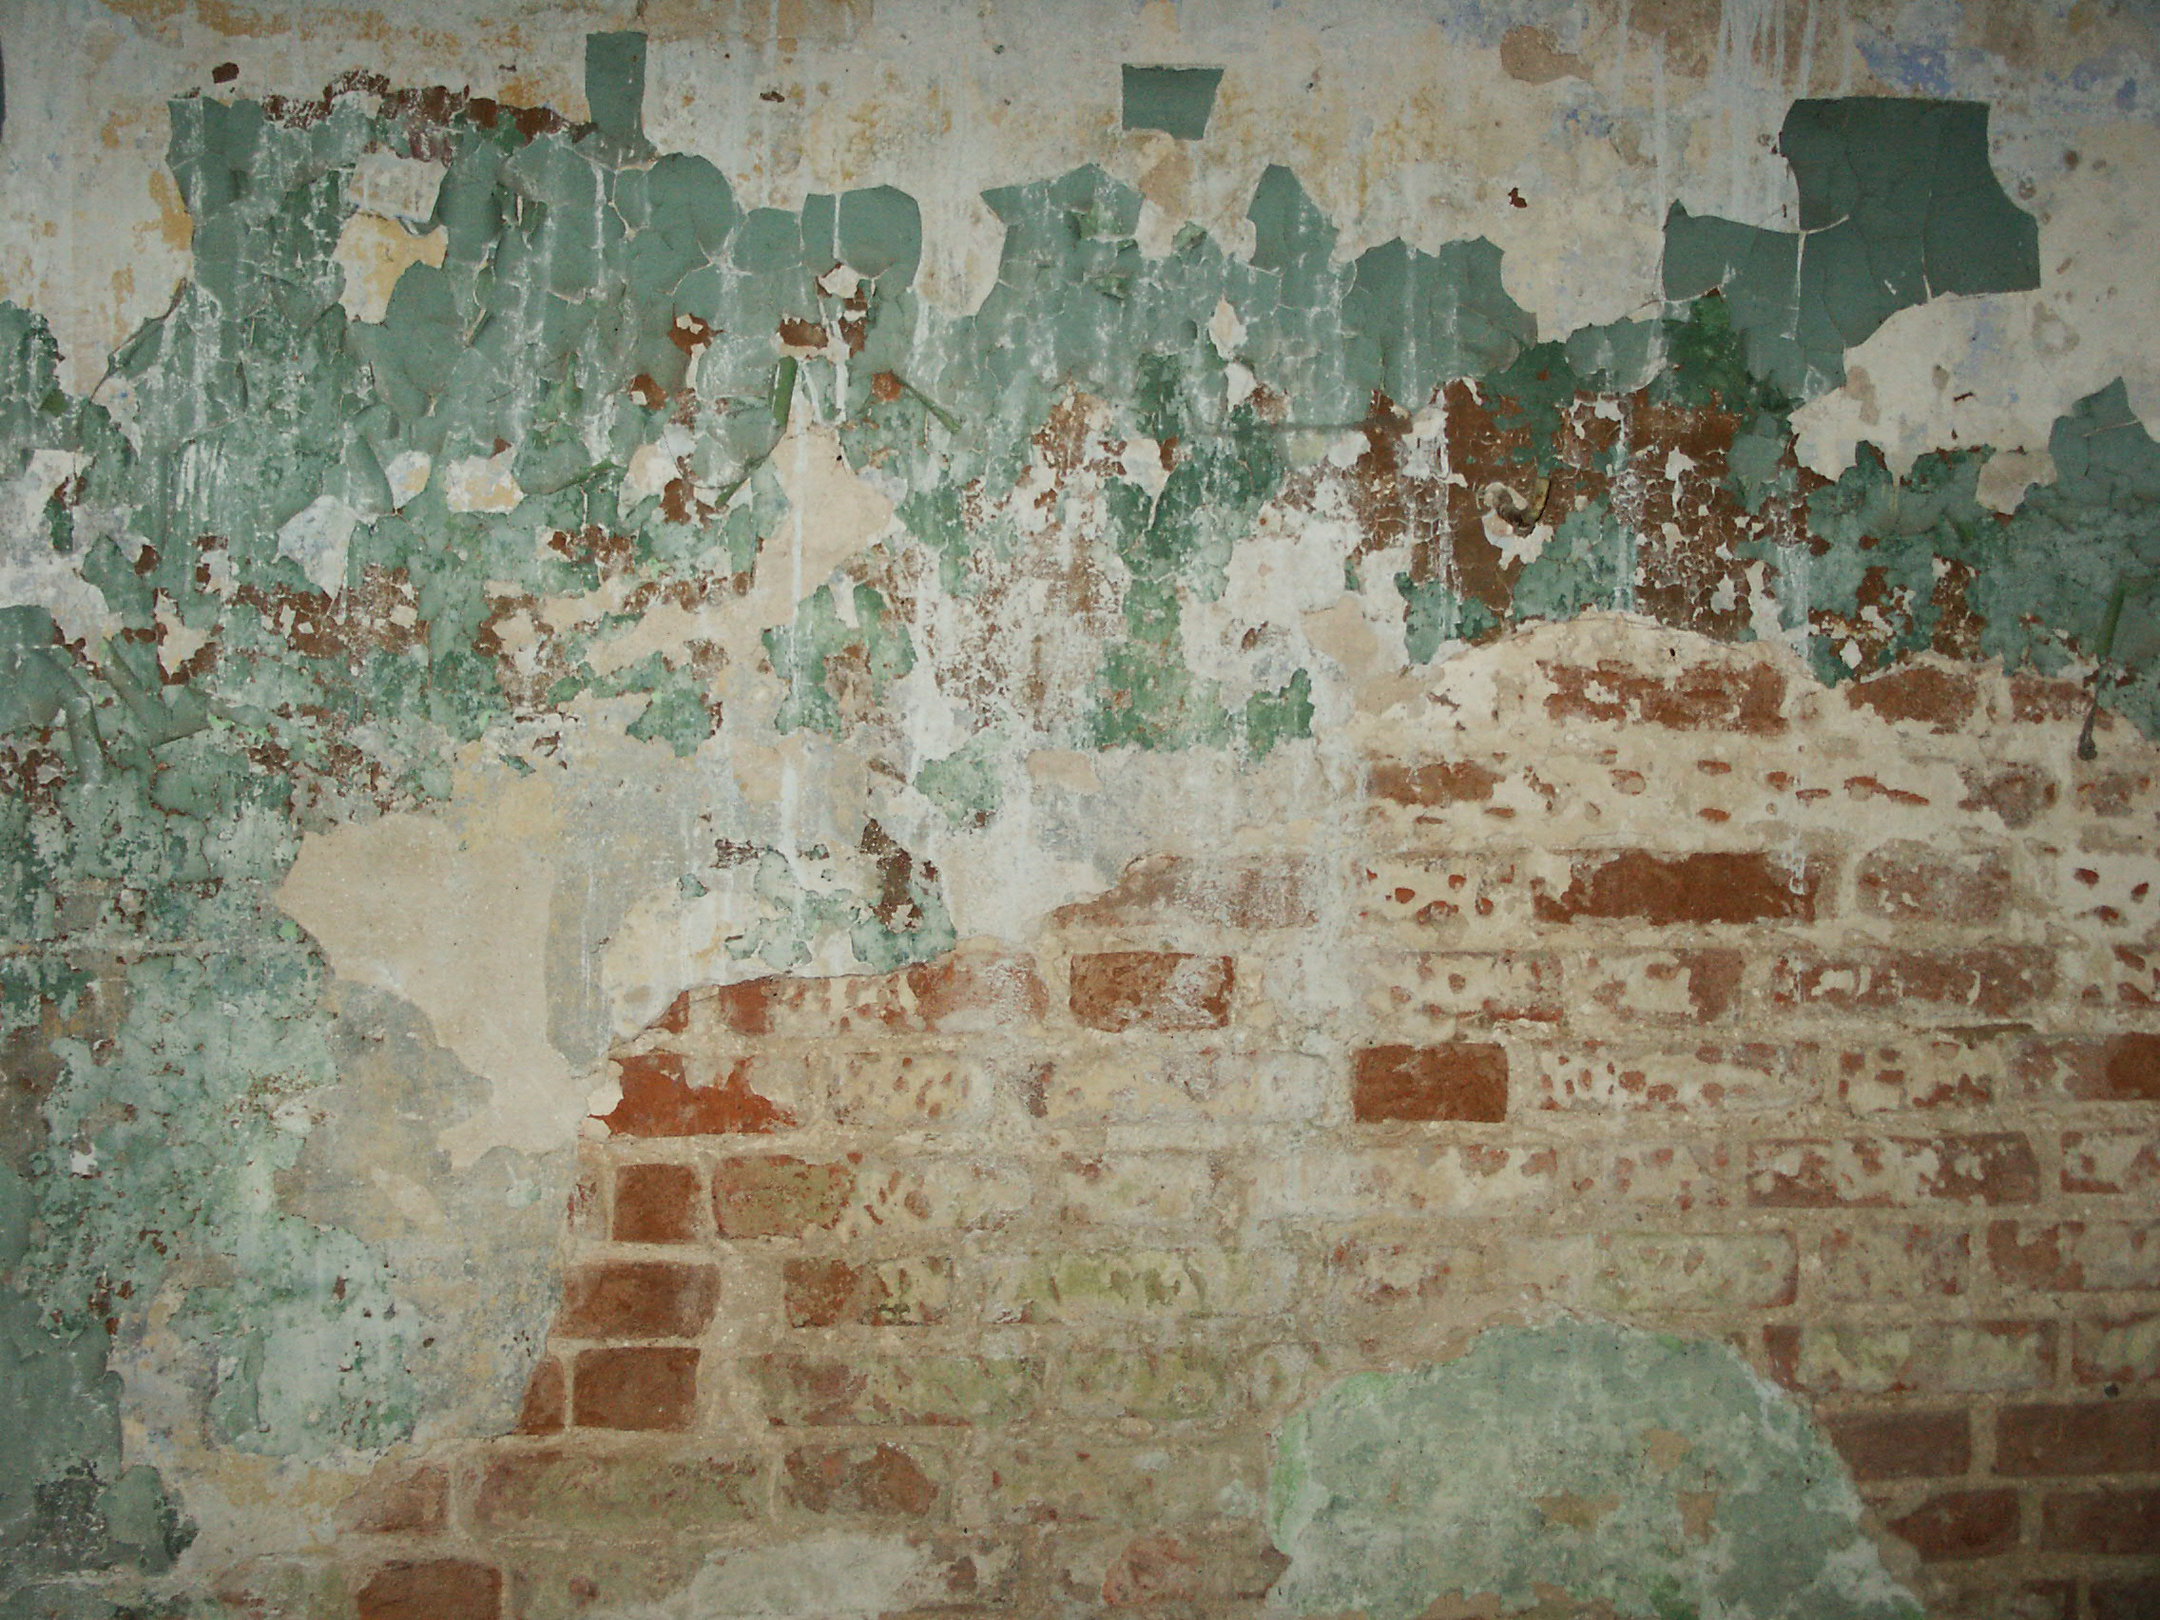 cracked paint and brick by oonerspism on DeviantArt